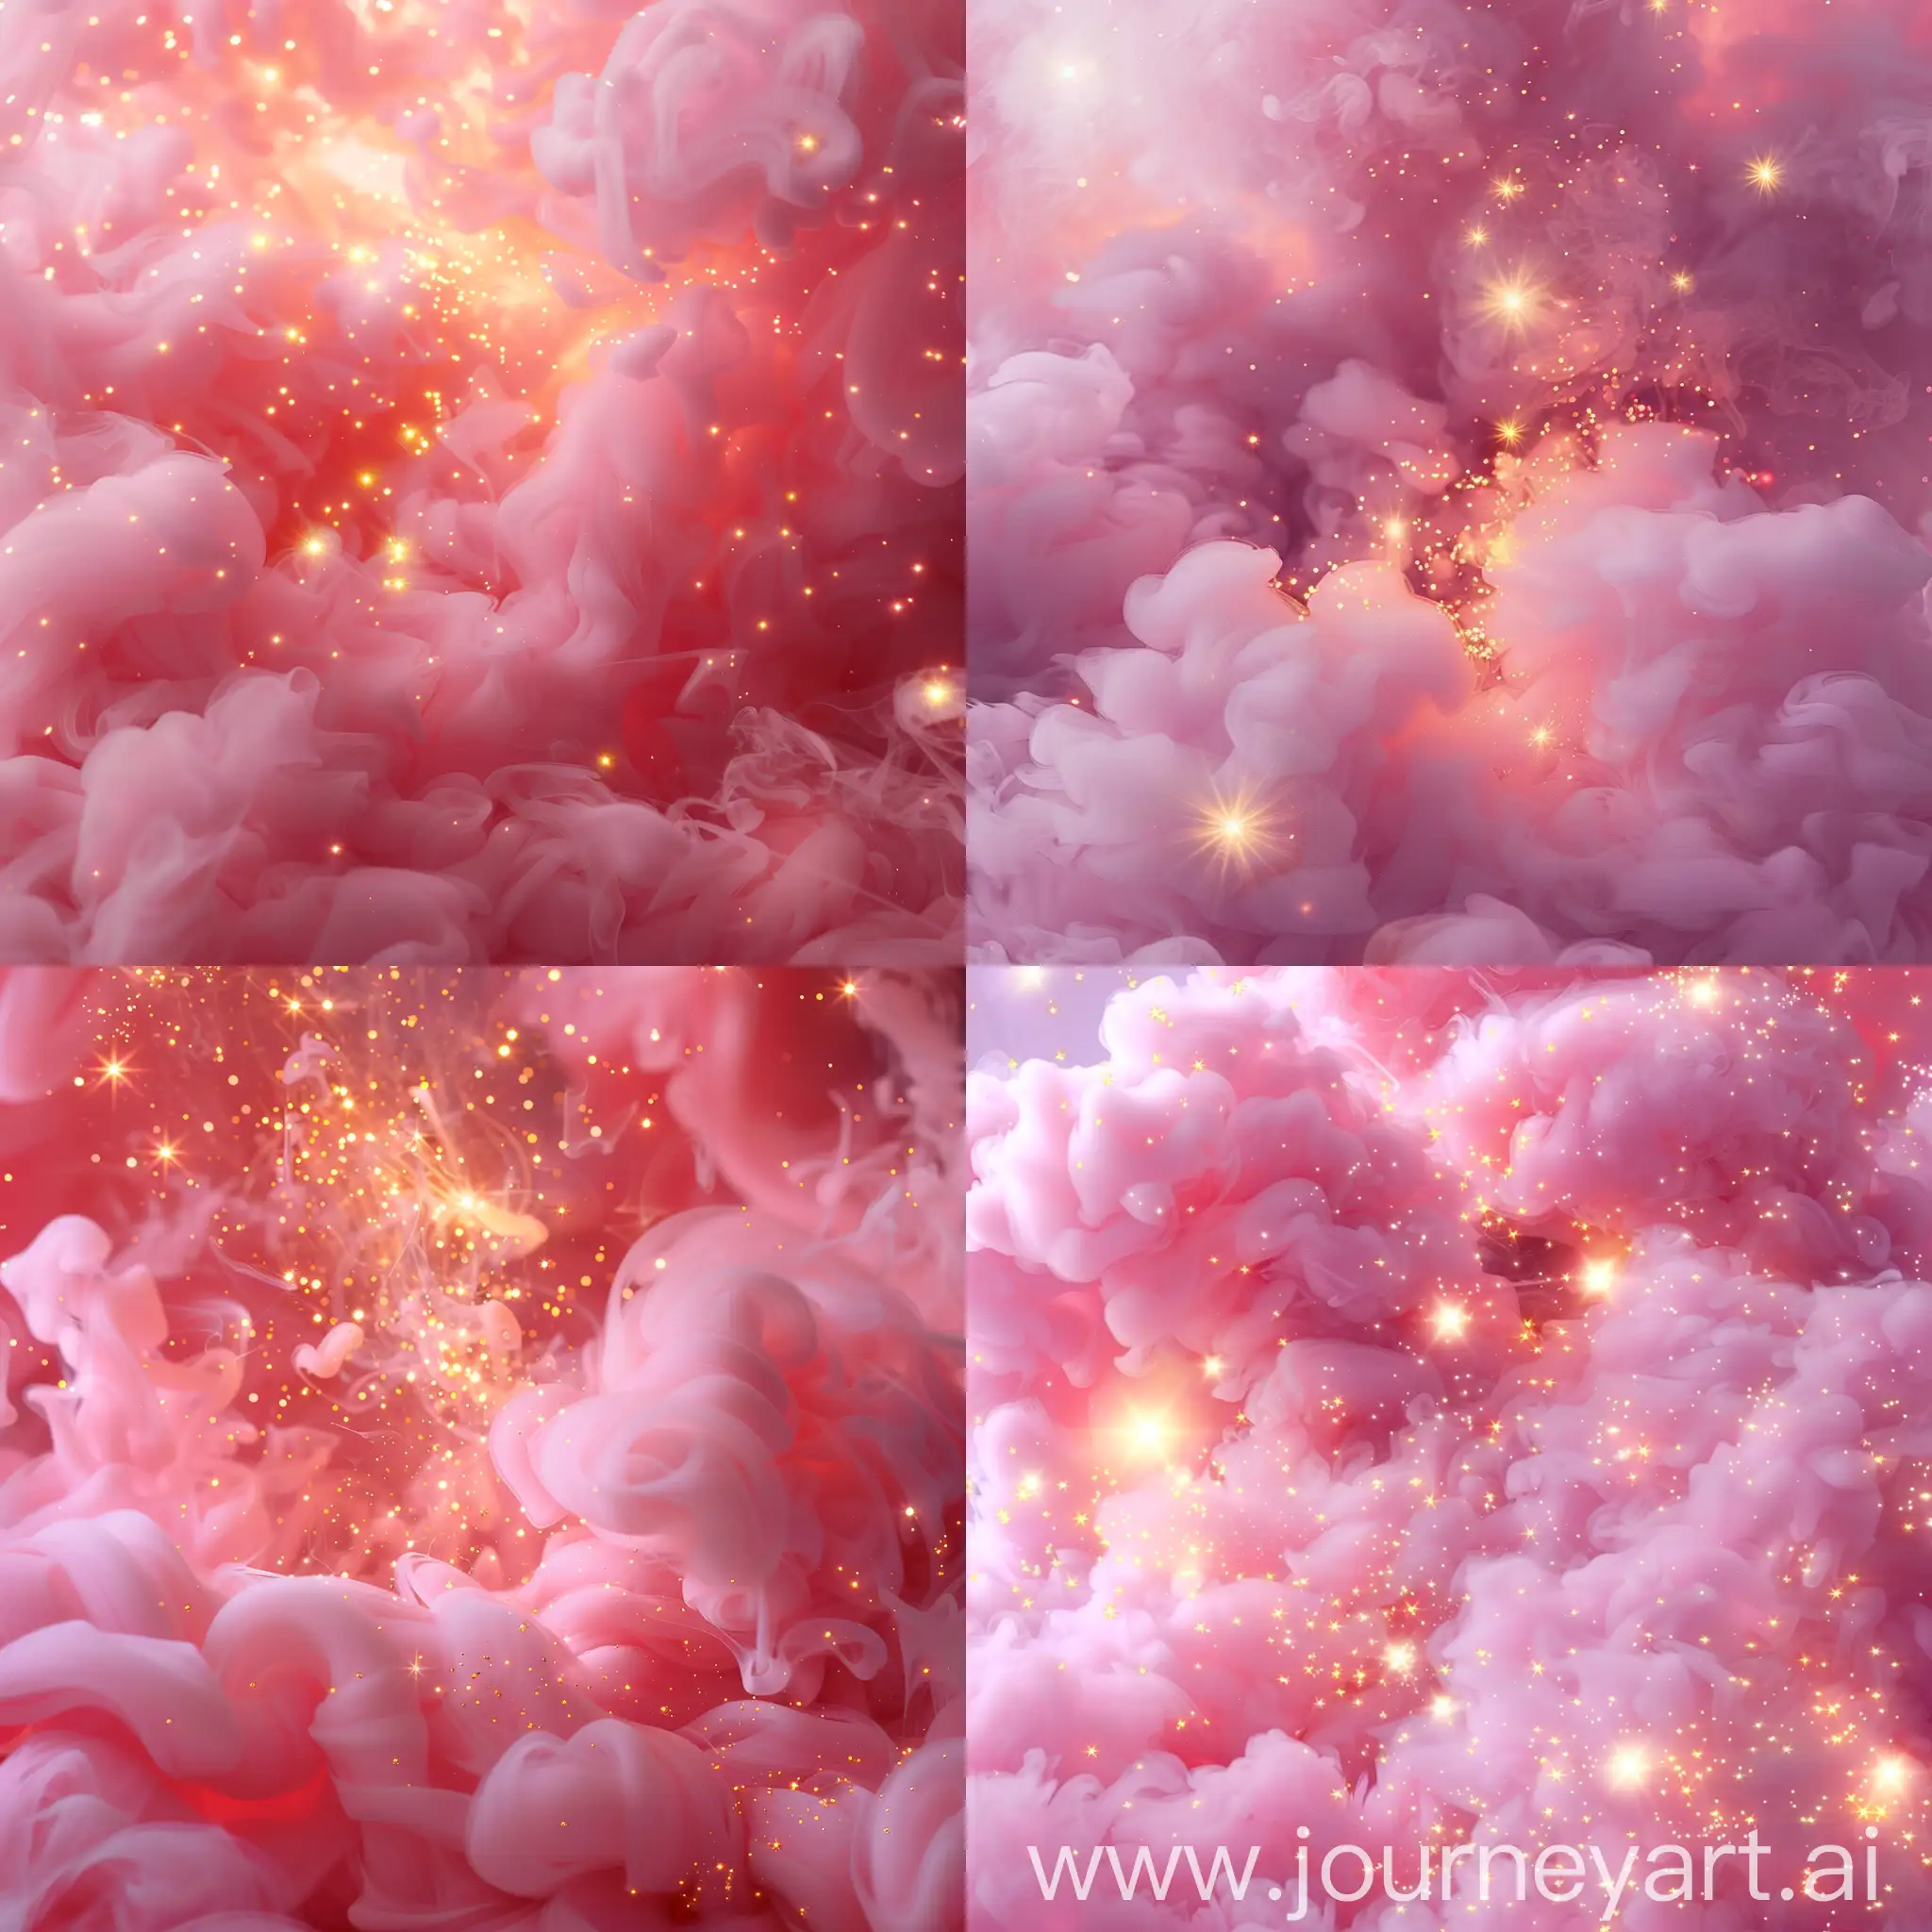 Golden-Stars-Floating-in-Pink-Milky-Smoke-High-Detail-CloseUp-Photo